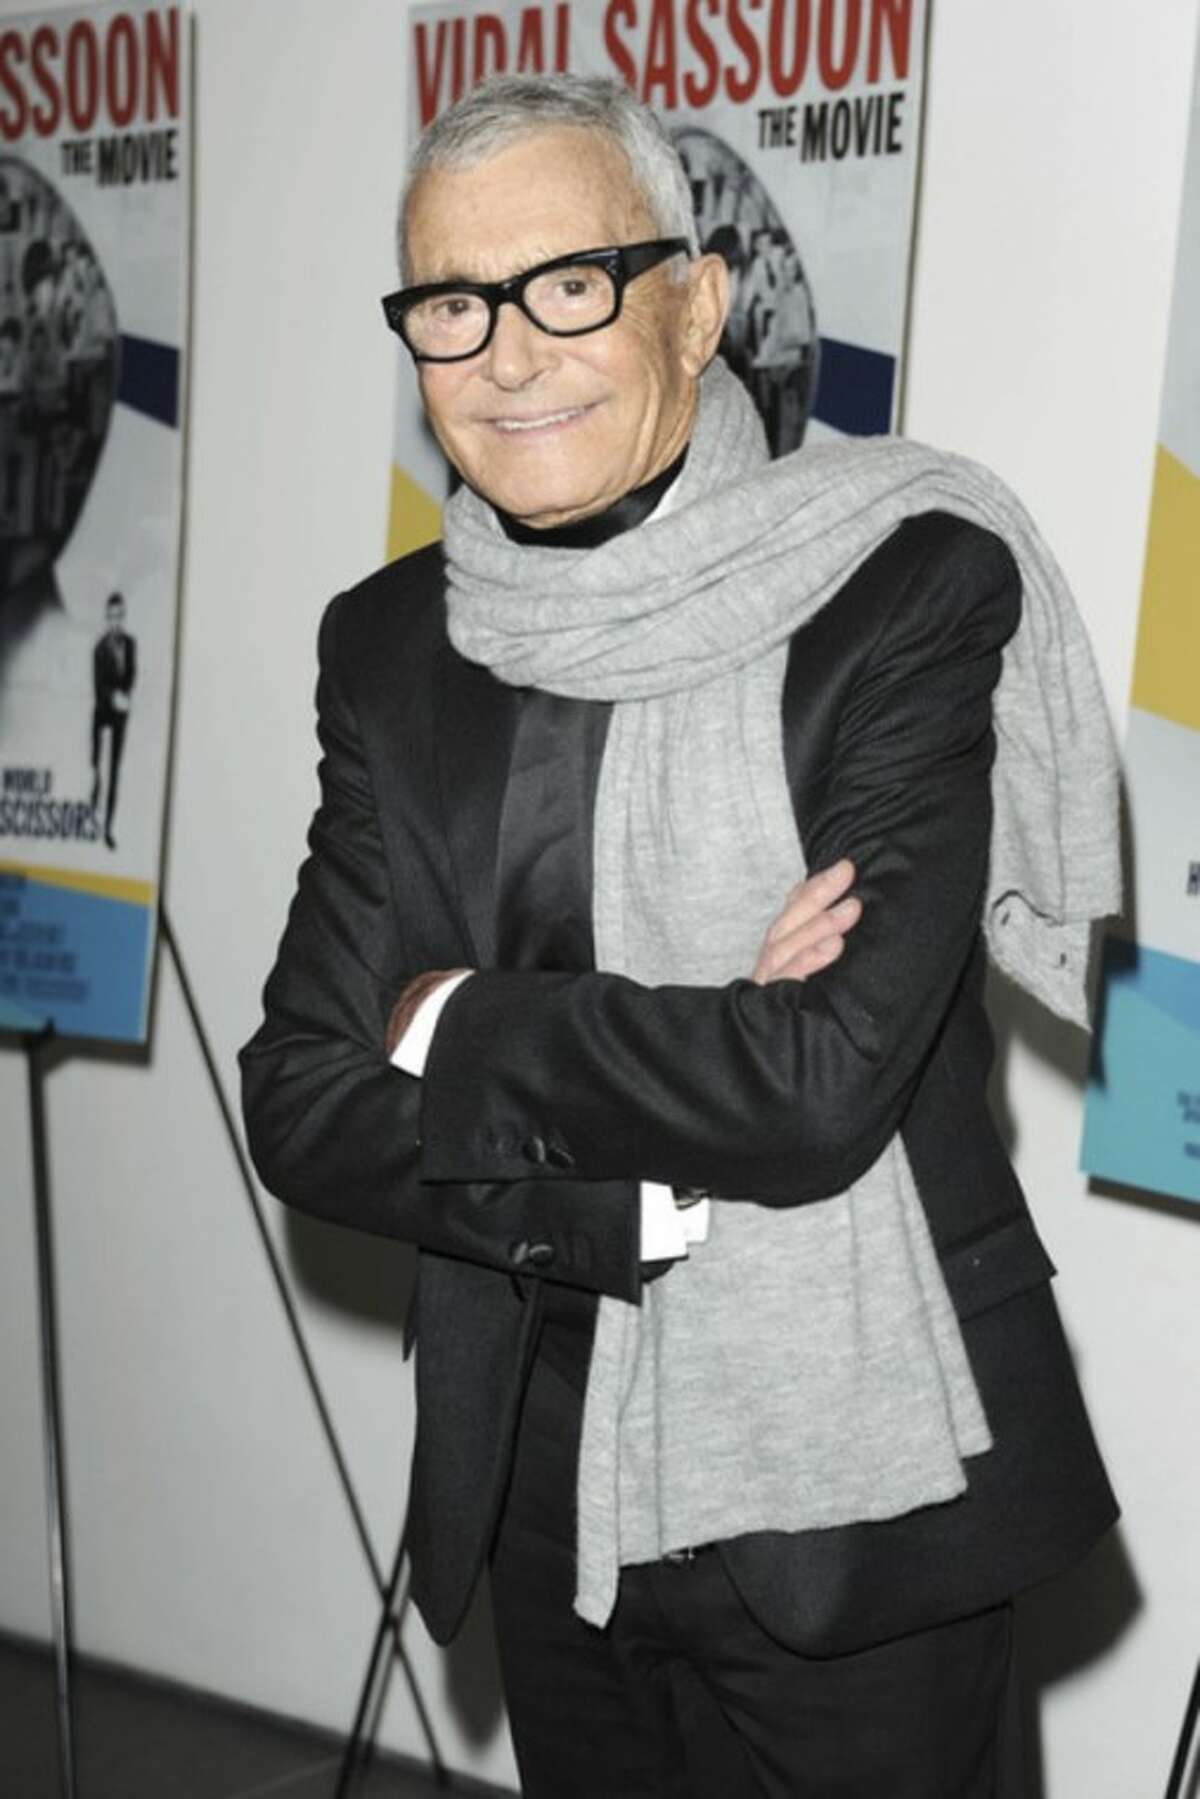 In this Feb. 9, 2011 file photo released by Starpix, hair designer and businessman, Vidal Sassoon, stops for a photo at a special screening of "Vidal Sassoon: The Movie," in New York. Sassoon, whose 1960s wash-and-wear cuts freed women from endless teasing and hairspray died Wednesday, May 9, 2012, at his home. He was 84. (AP Photo/Starpix, Dave Allocca)